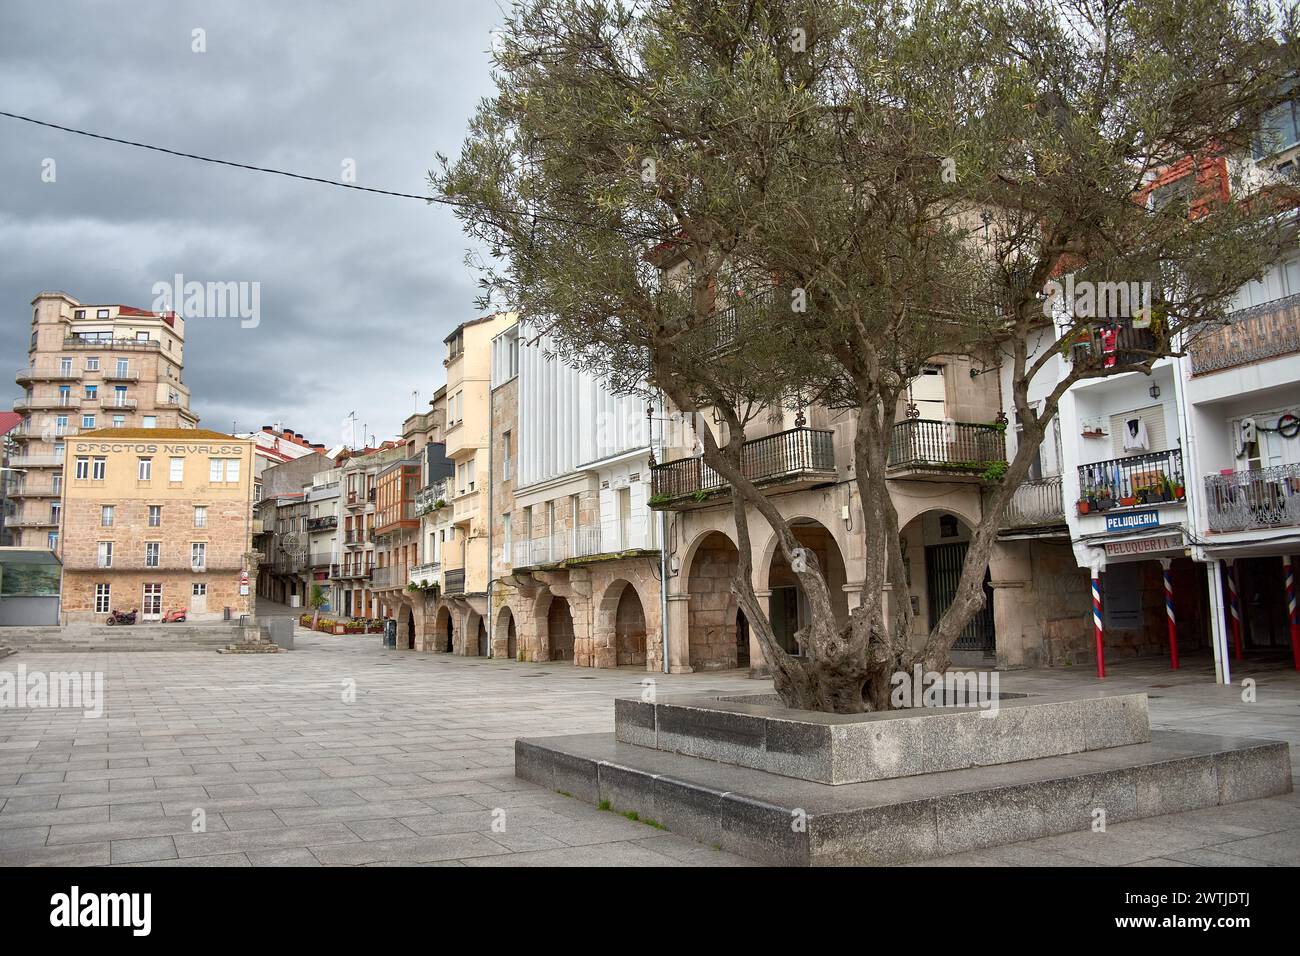 Plaza do Berbes in the historic center of Vigo on a cloudy day without people Stock Photo